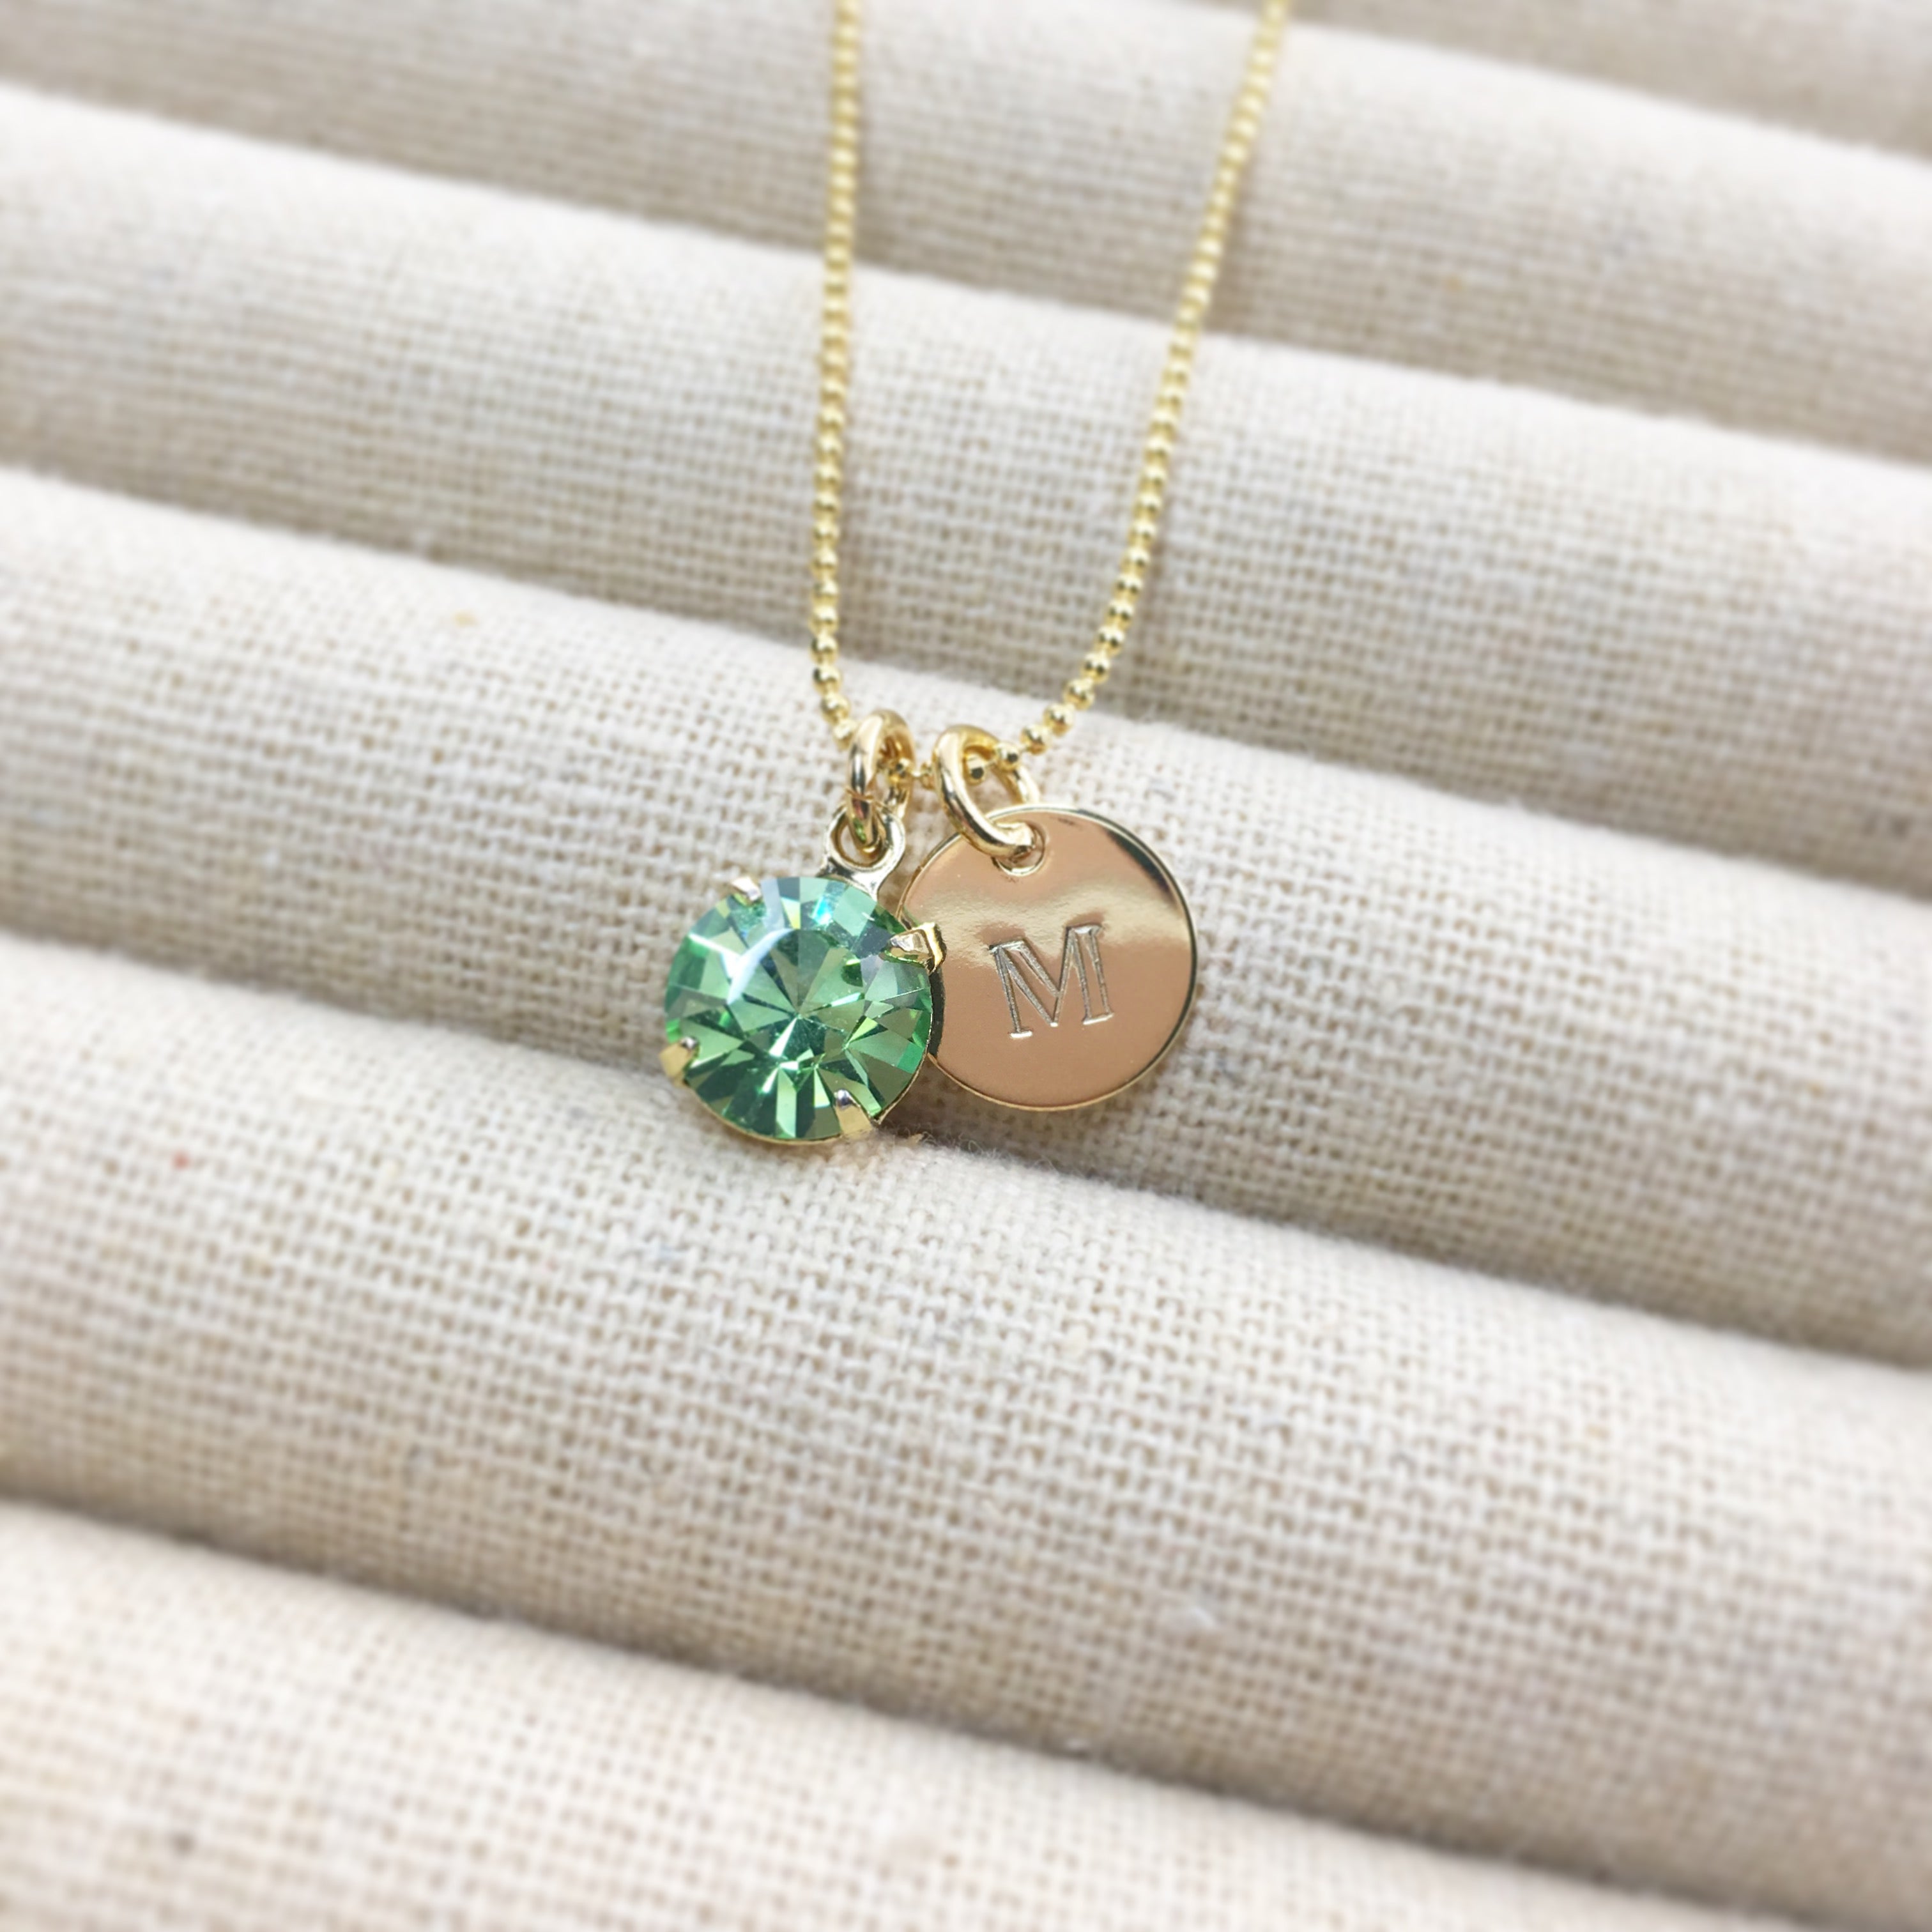 Custom Gemstone Letter Necklace by Caitlynminimalist Initial Birthstone  Necklace Name Necklace Jewelry Birthday Gift for Mom NM54F77 - Etsy | Initial  birthstone necklace, Letter necklace, Fingerprint necklace